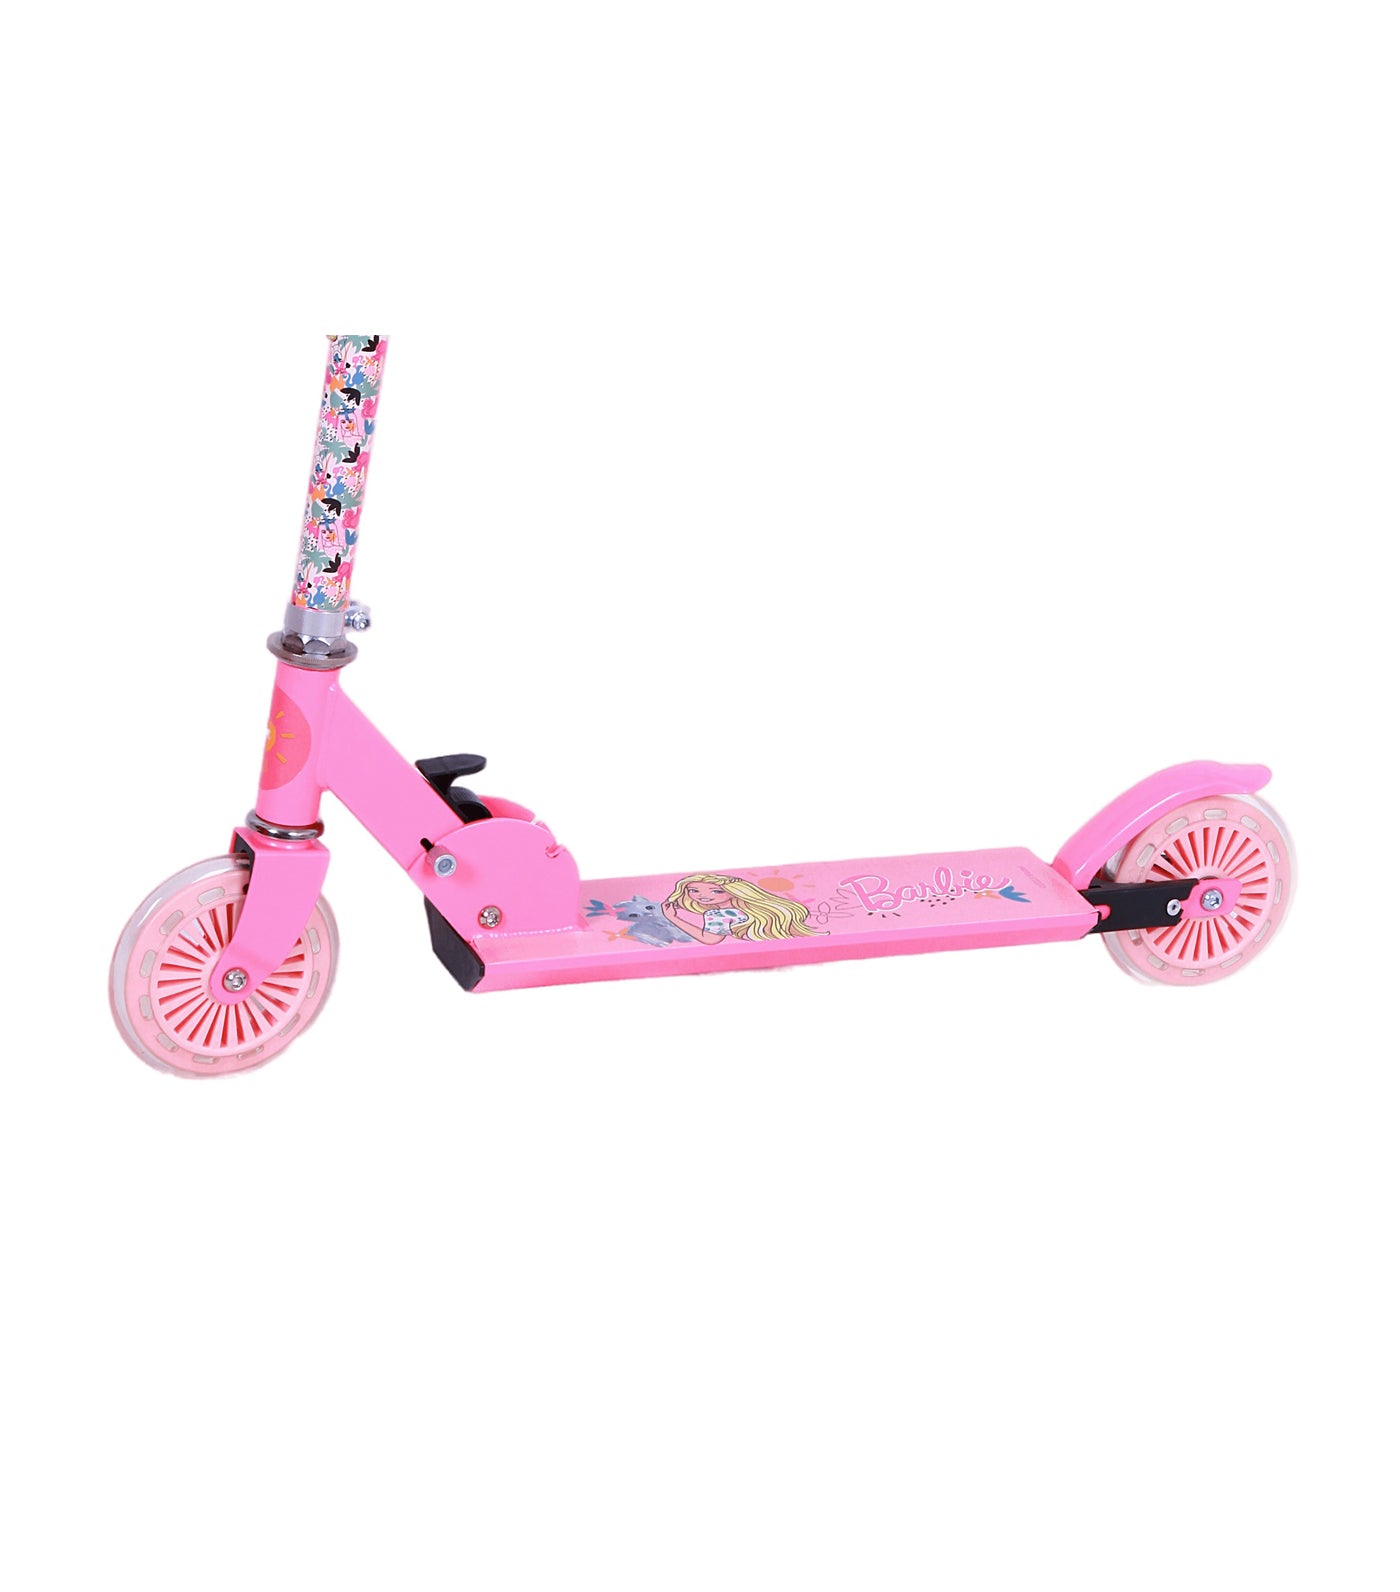 Barbie® In-Line Scooter - Pink